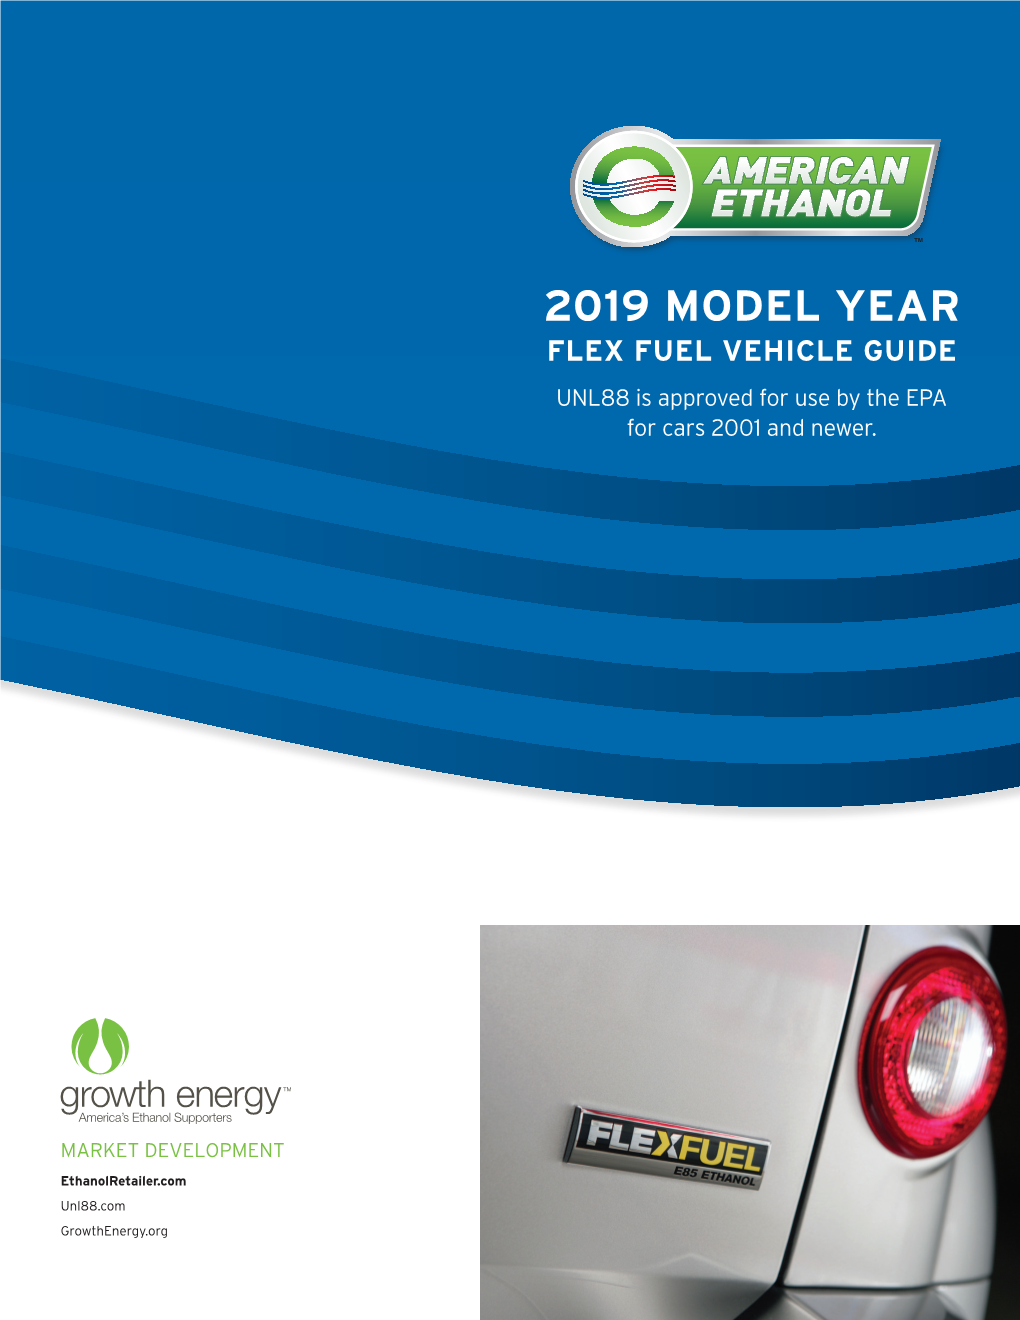 2019 MODEL YEAR FLEX FUEL VEHICLE GUIDE UNL88 Is Approved for Use by the EPA for Cars 2001 and Newer